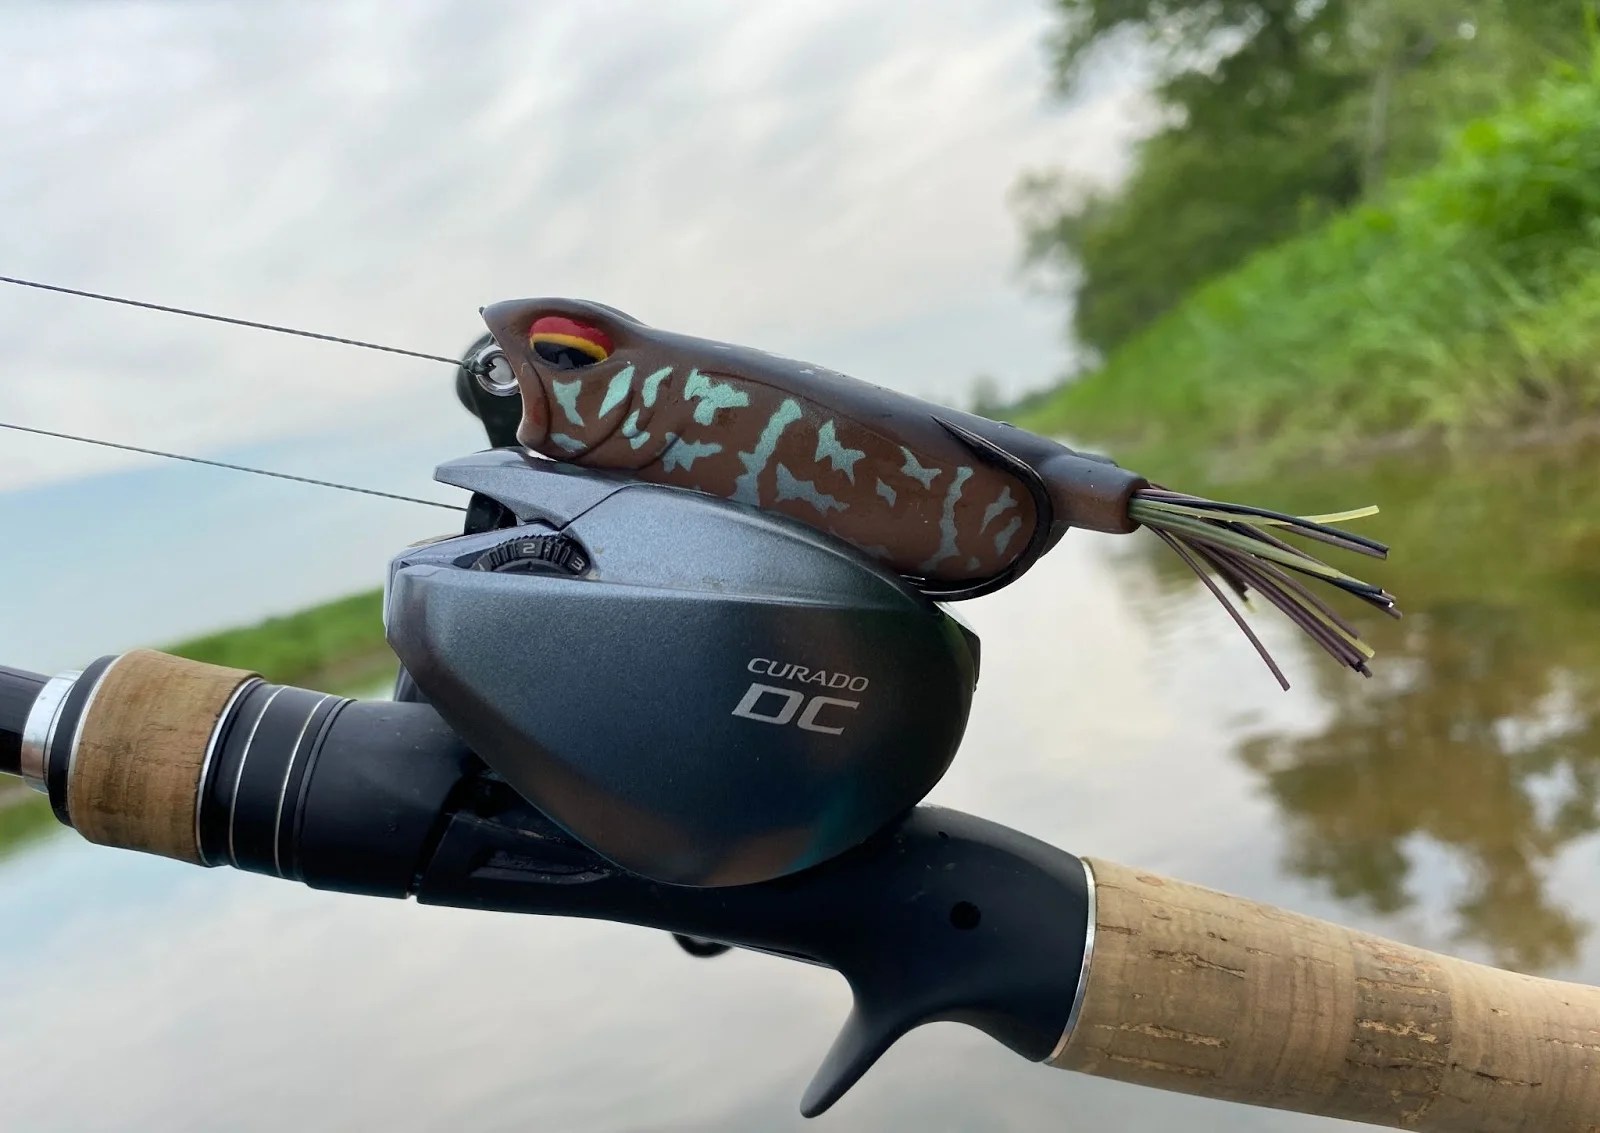 Will Frog Lures Work Inshore? [Z-Man Goat ToadZ Review]